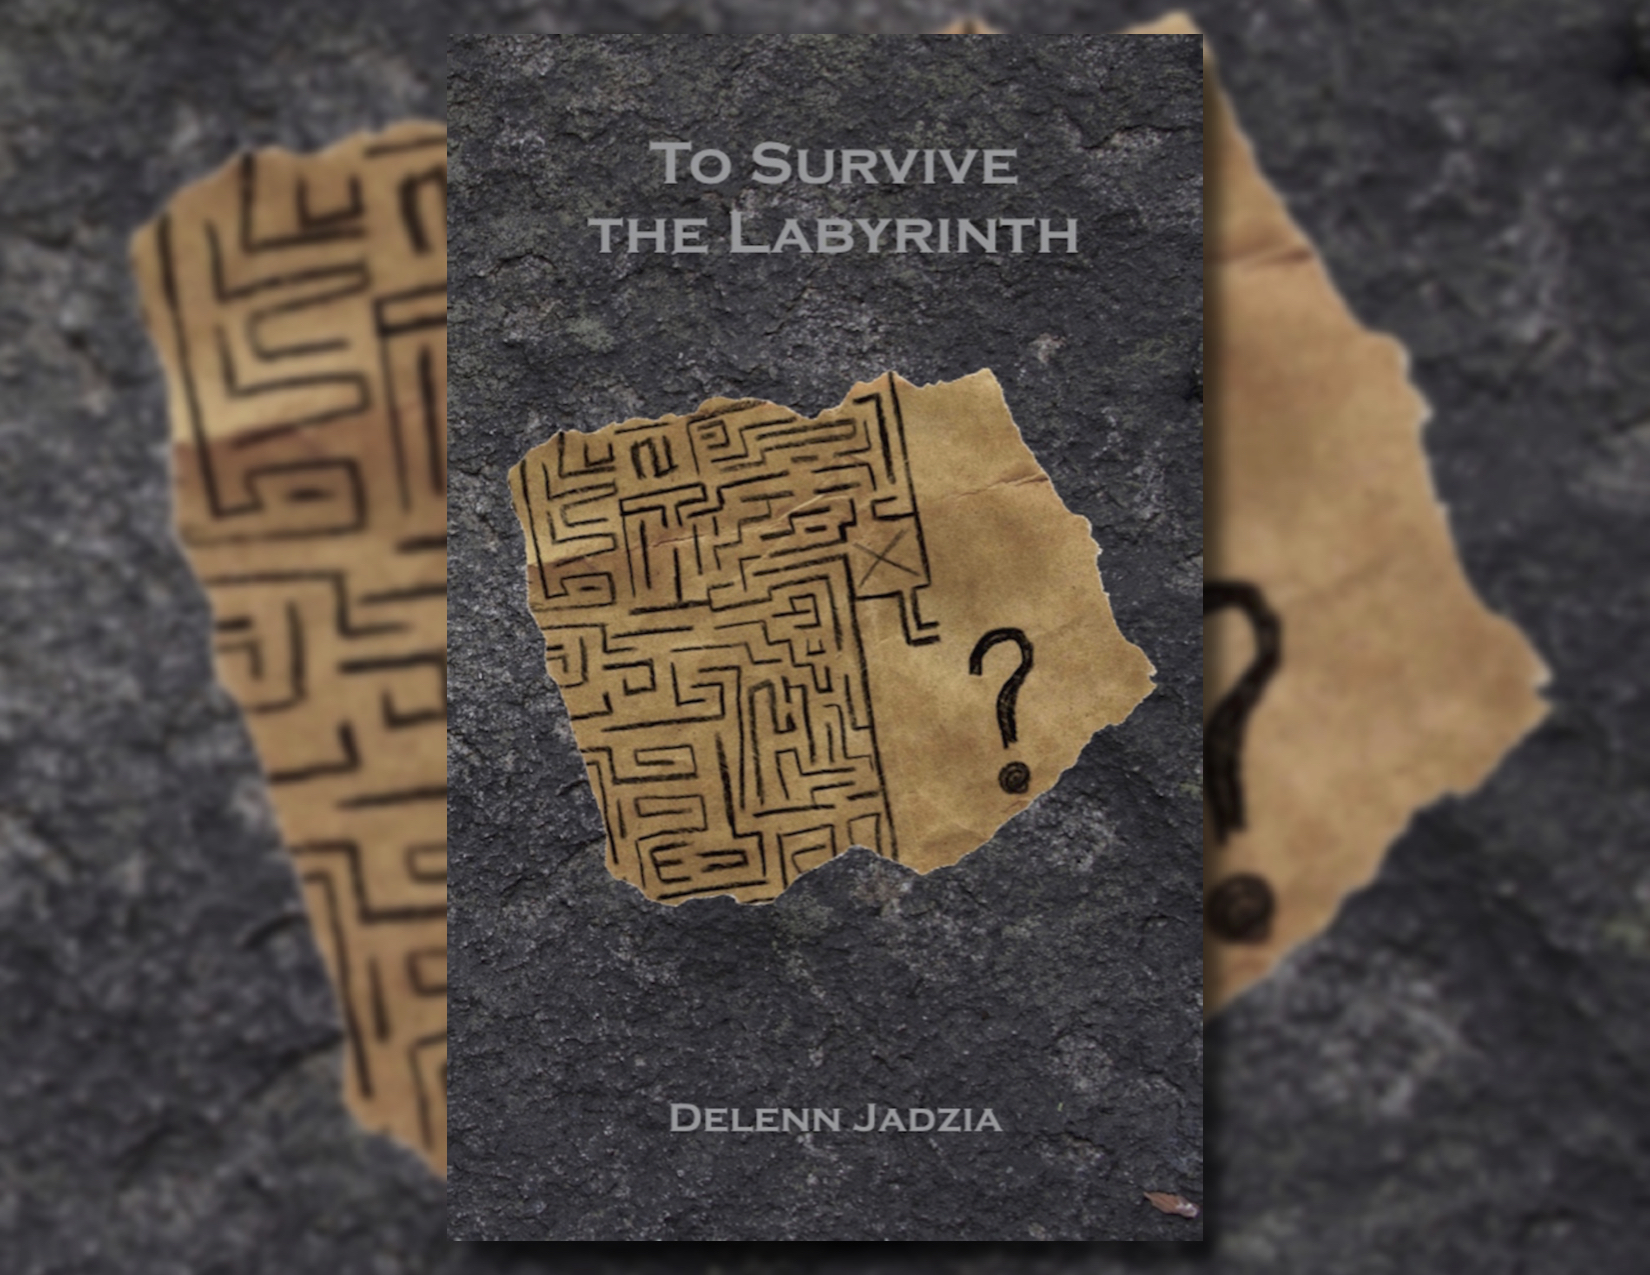 The cover image for the novel To Survive the Labyrinth by Delenn Jadzia